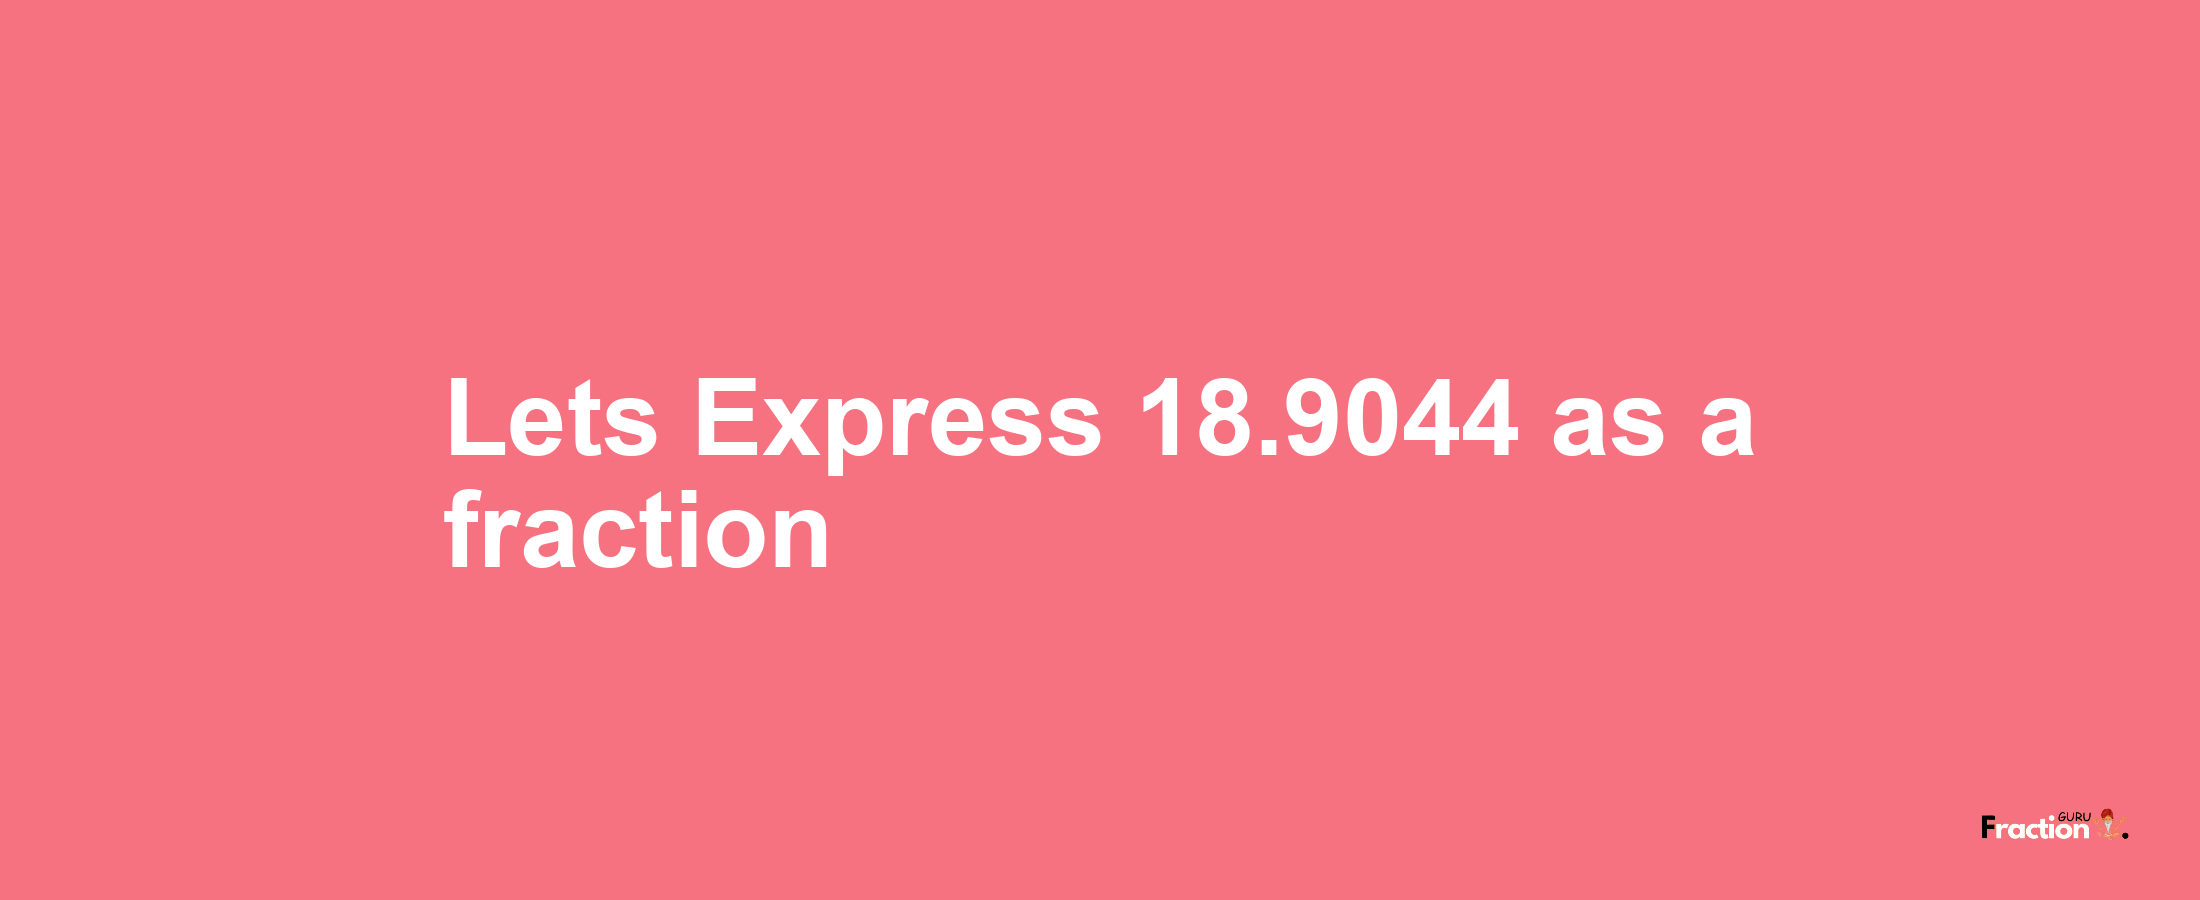 Lets Express 18.9044 as afraction